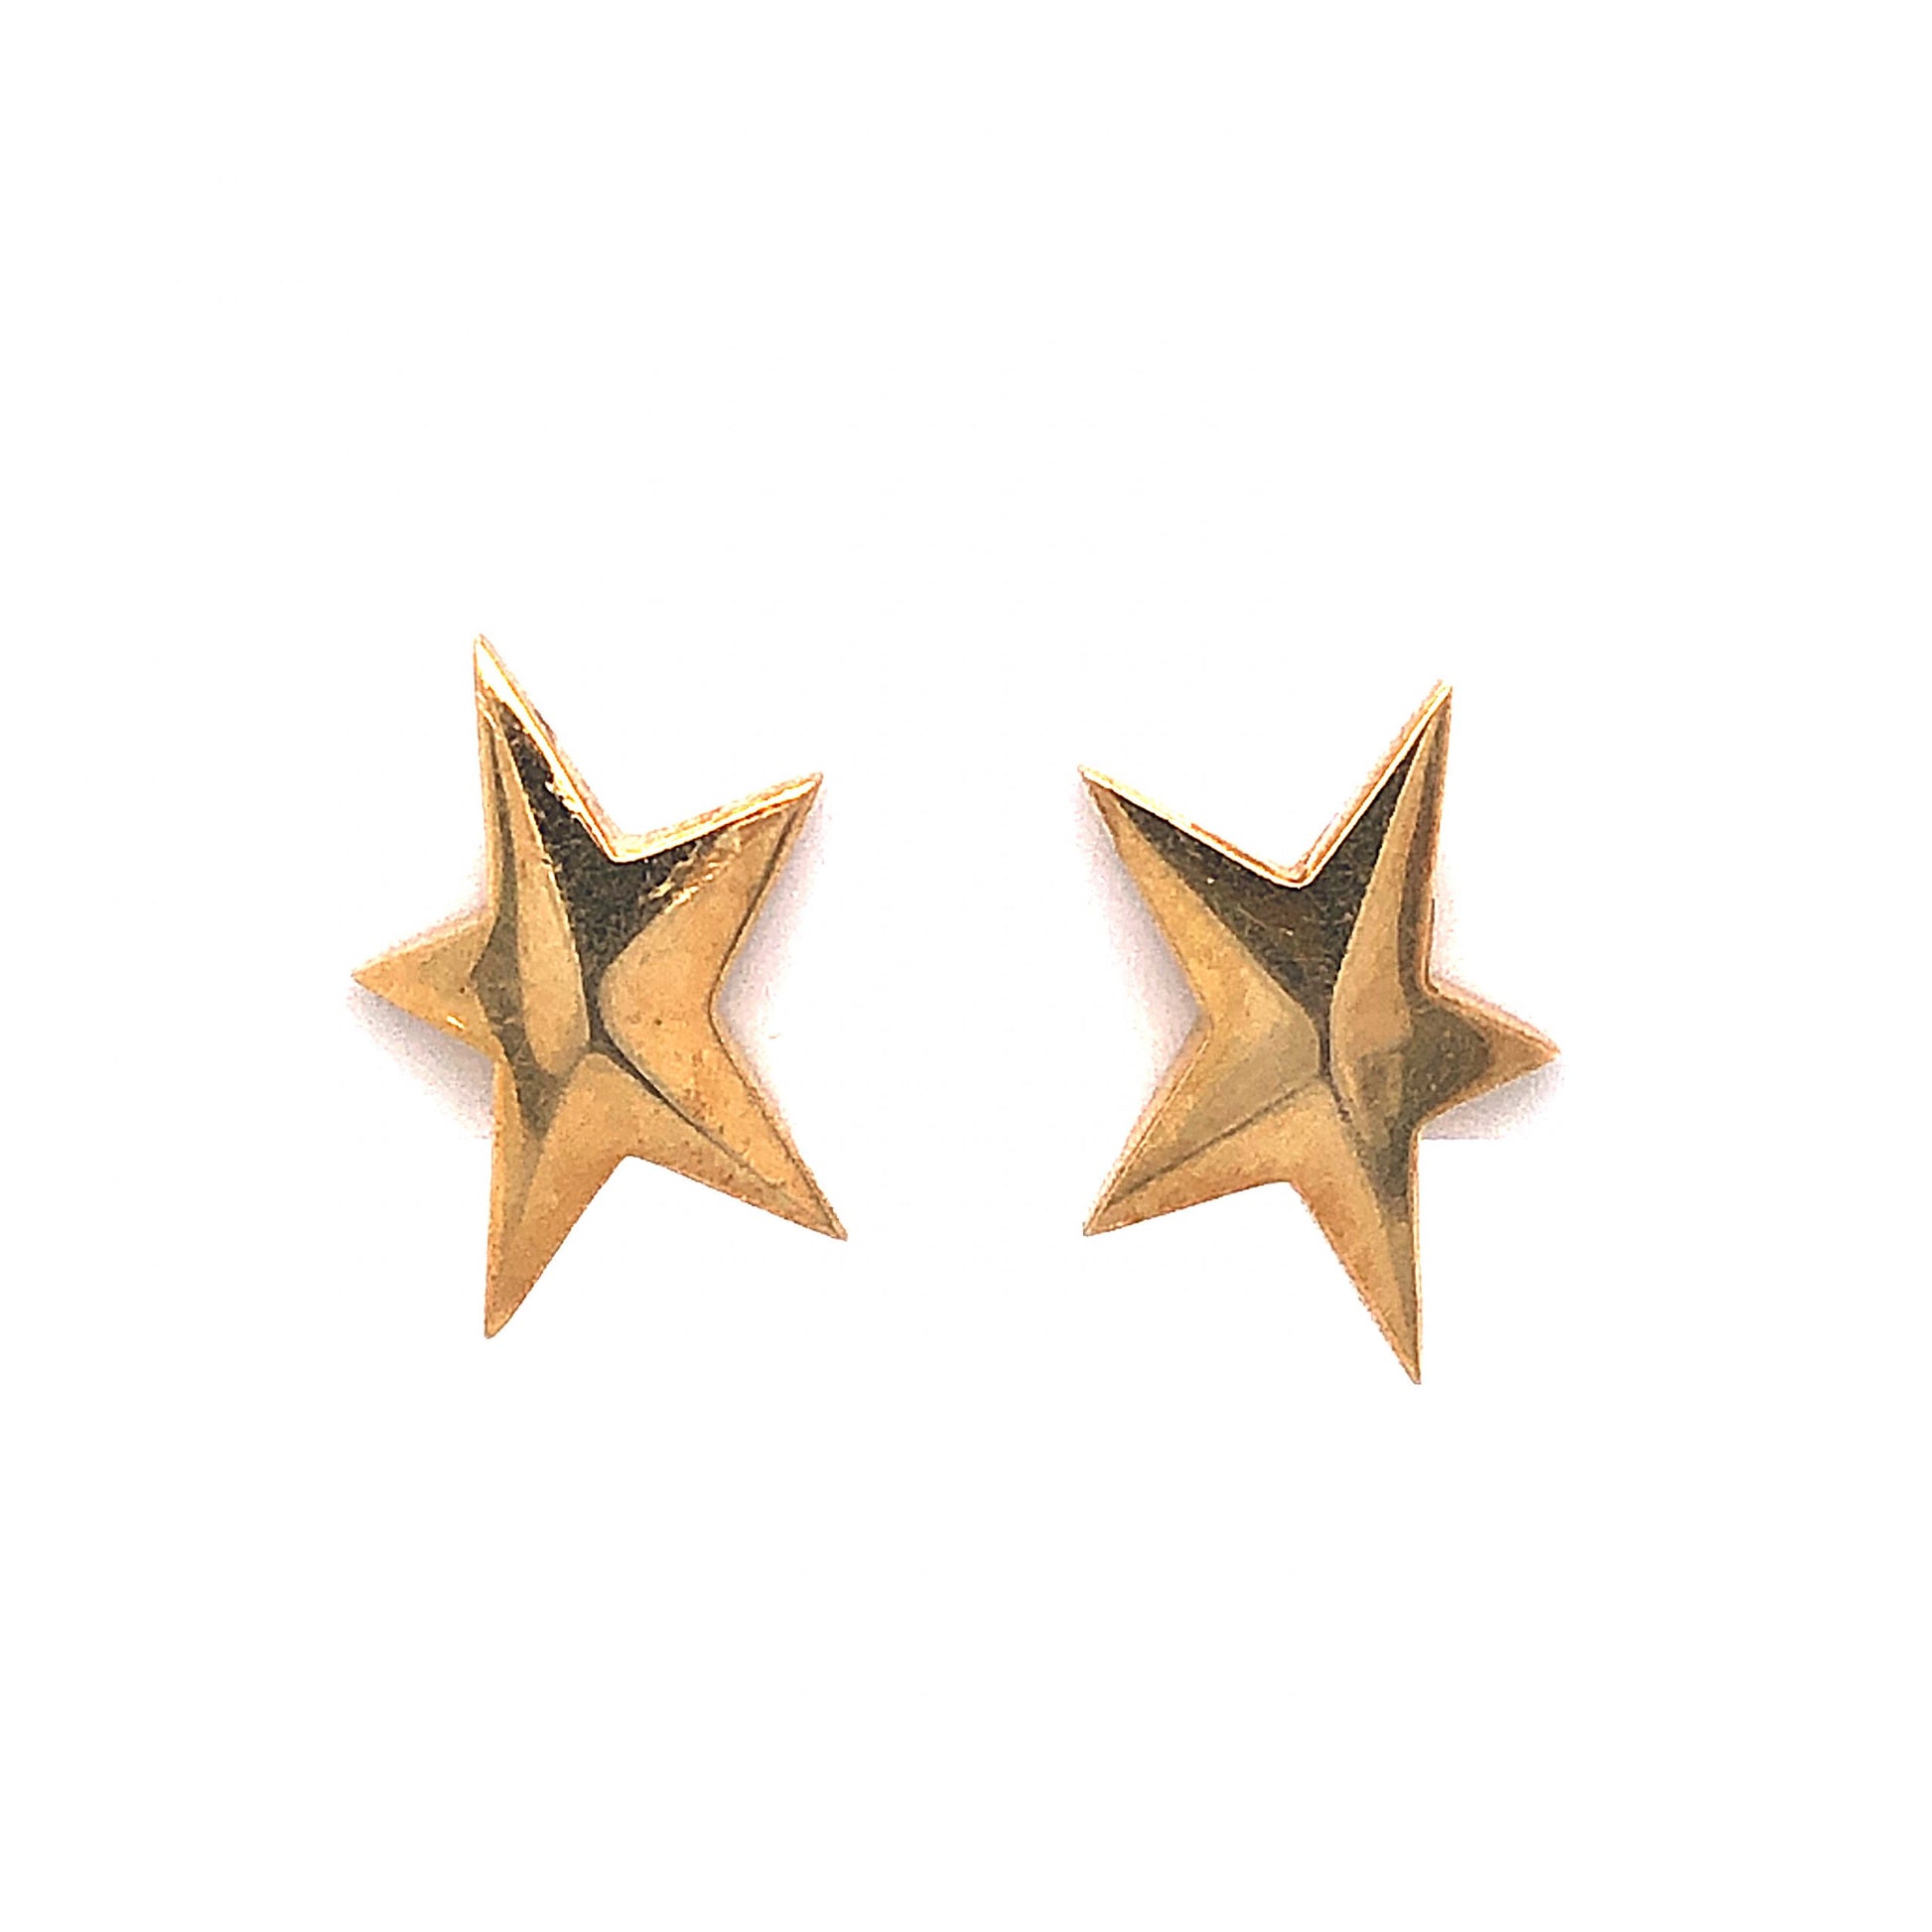 Tiffany & Co. Star Stud Earrings in 18k Yellow GoldComposition: 18 Karat Yellow Gold Total Gram Weight: 3.5 g Inscription: 1985 Tiffany & Co. 18k
      